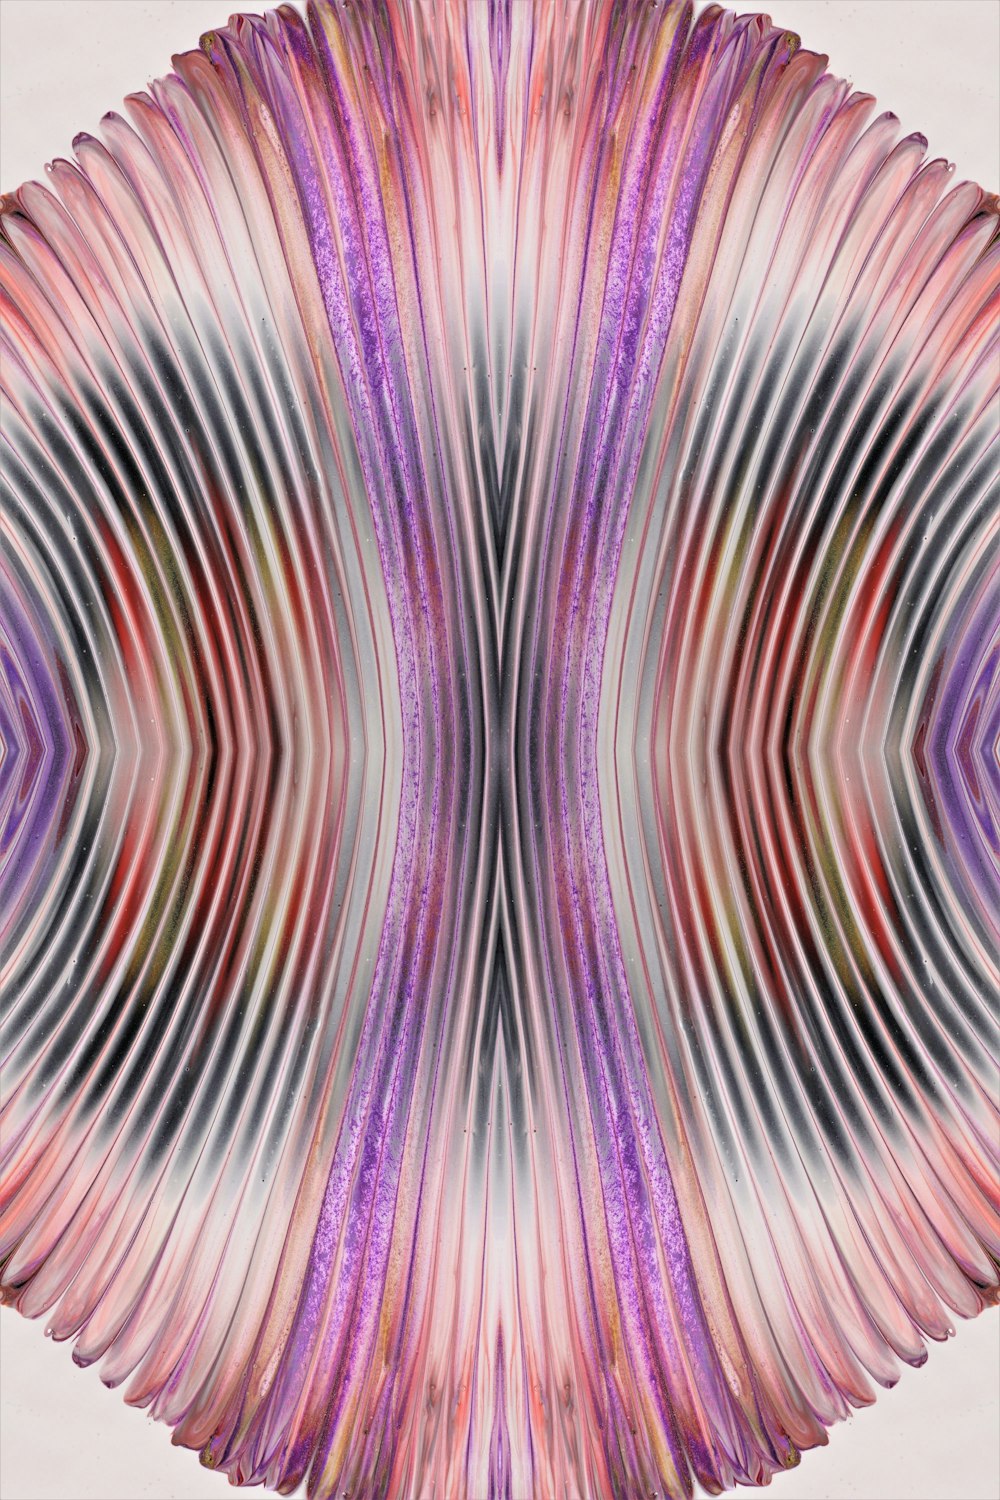 an abstract image of pink and purple lines